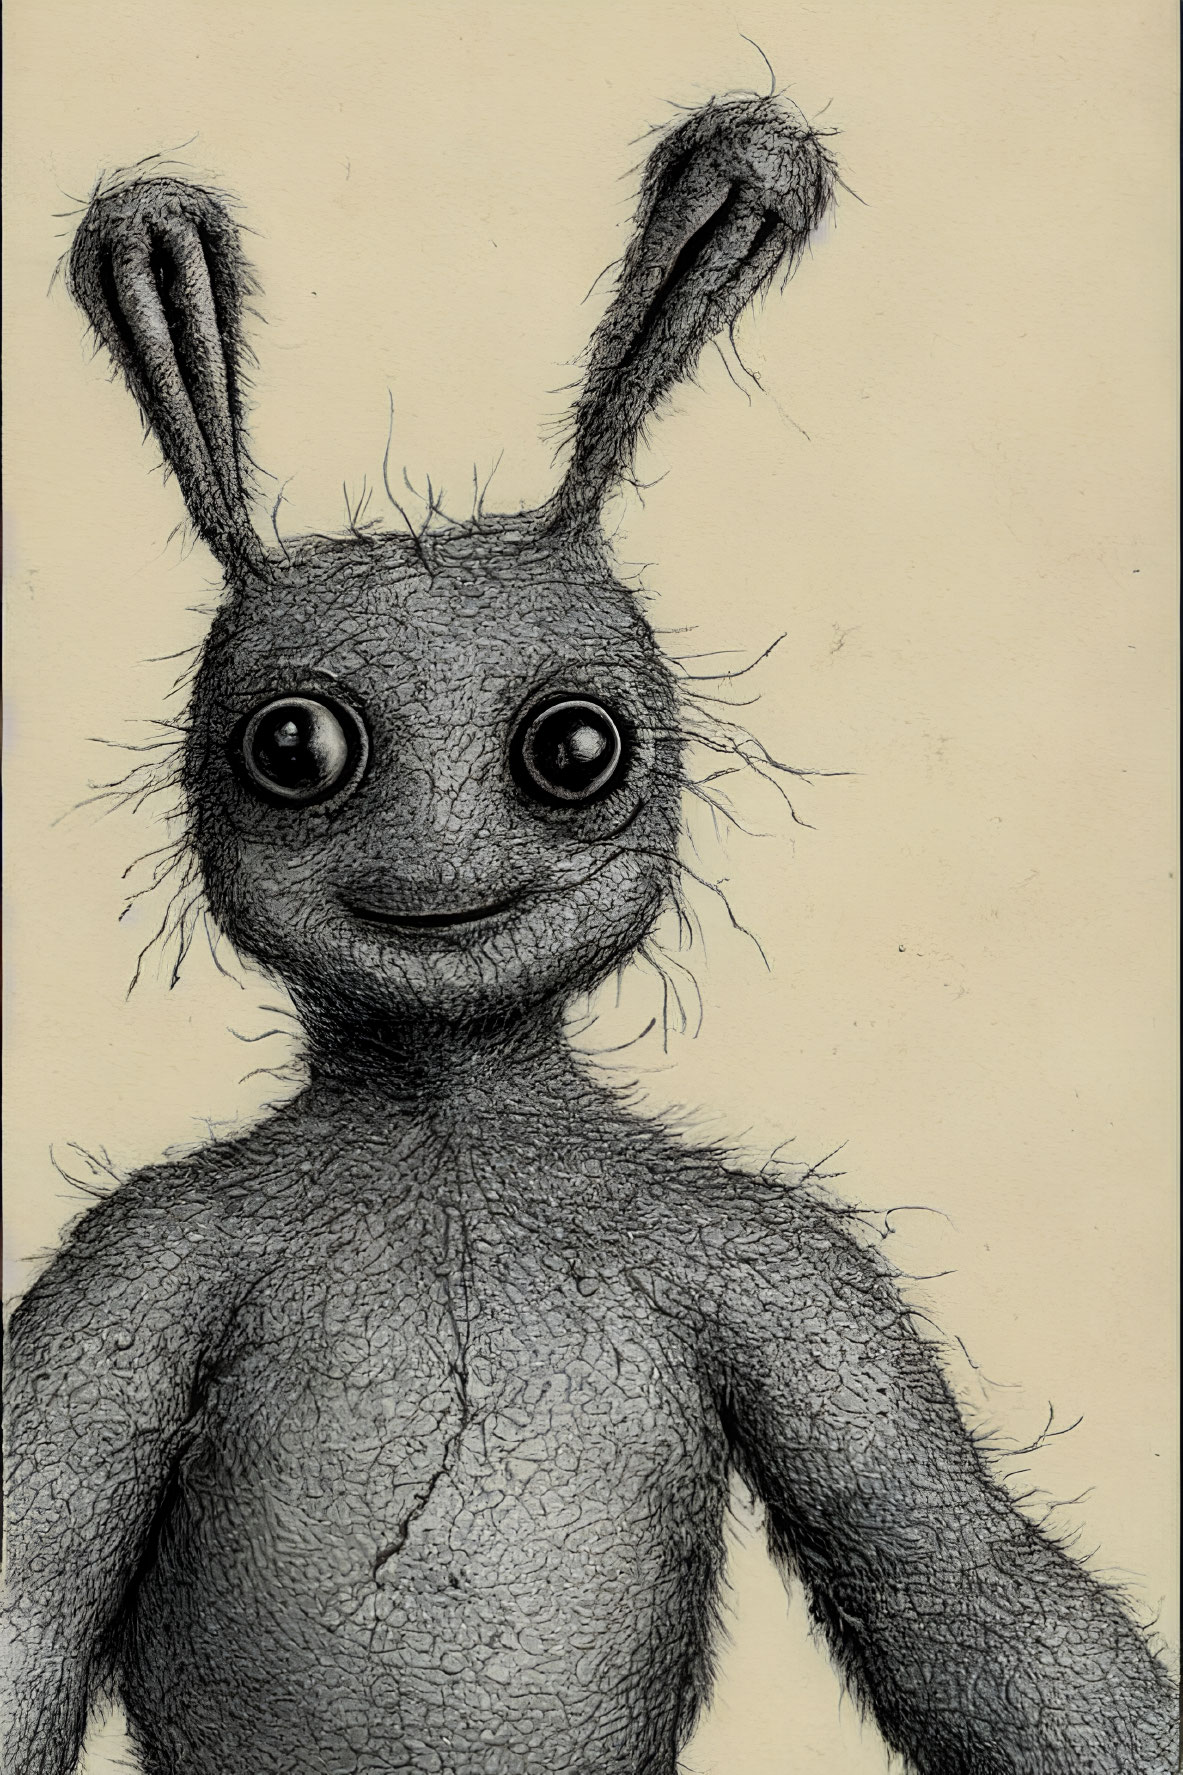 Whimsical creature with rabbit-like ears and large eyes